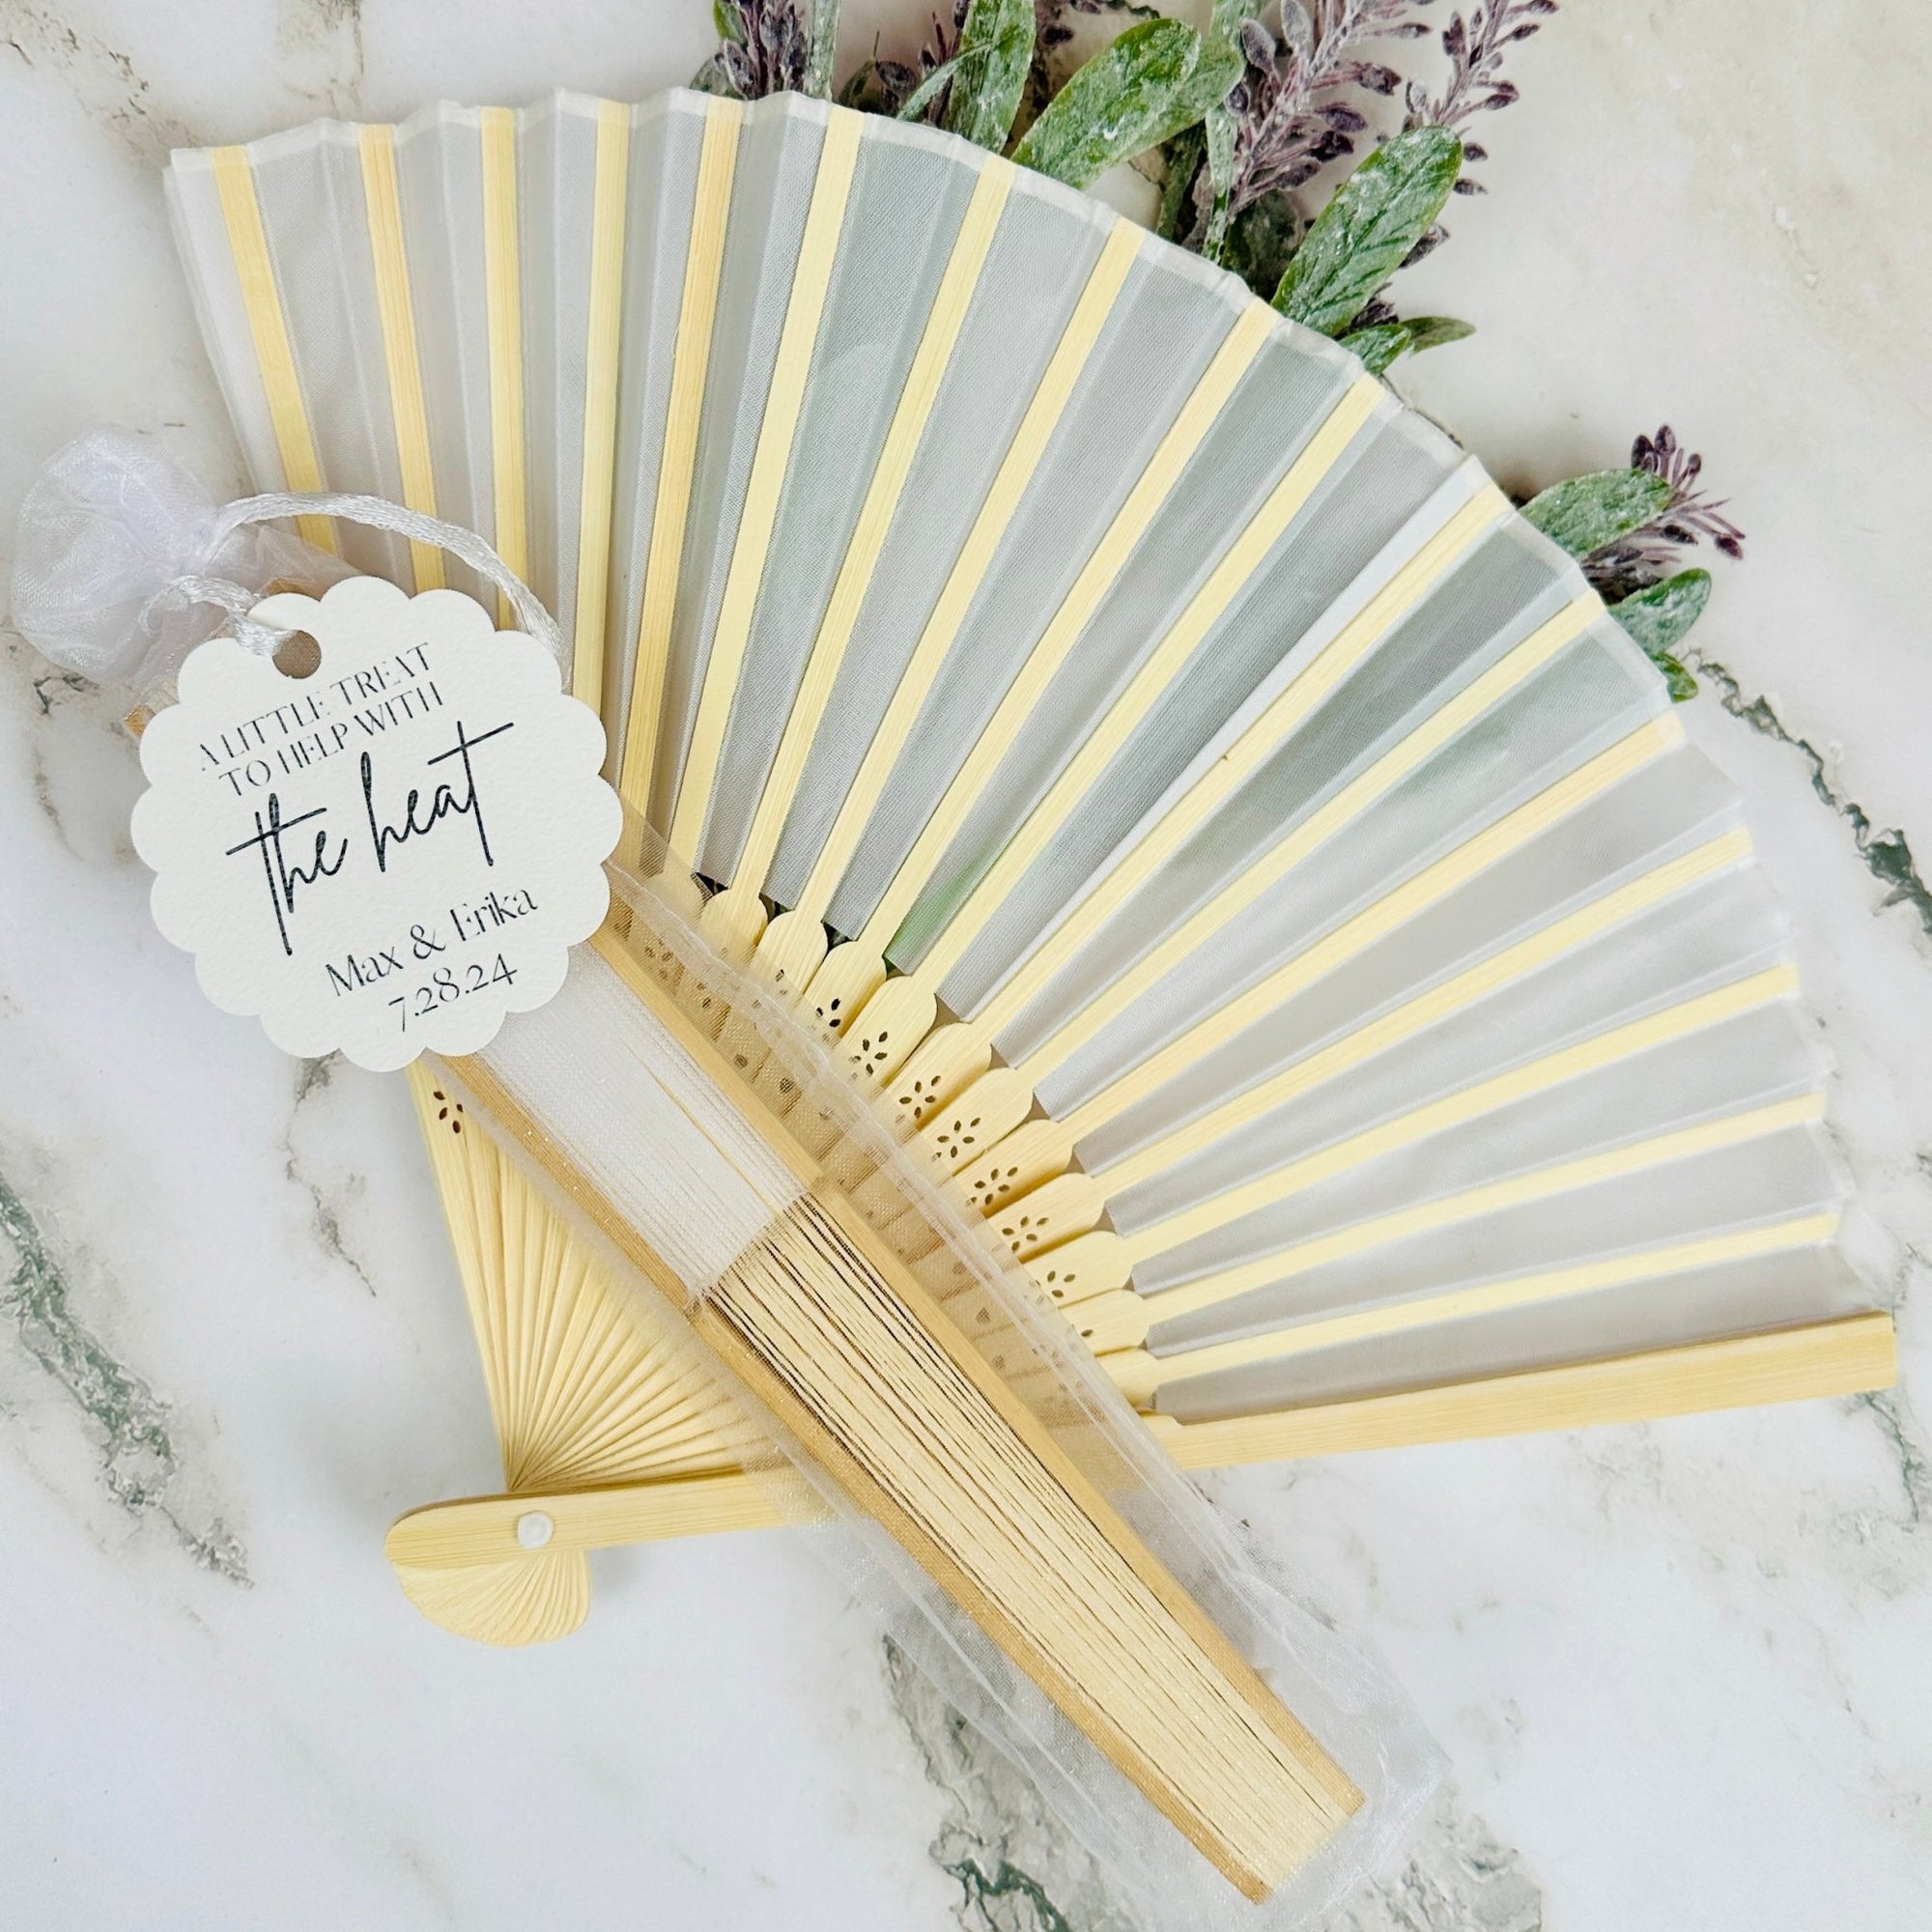 DIY- How To Make Cute Paper Fans, Hand Fans